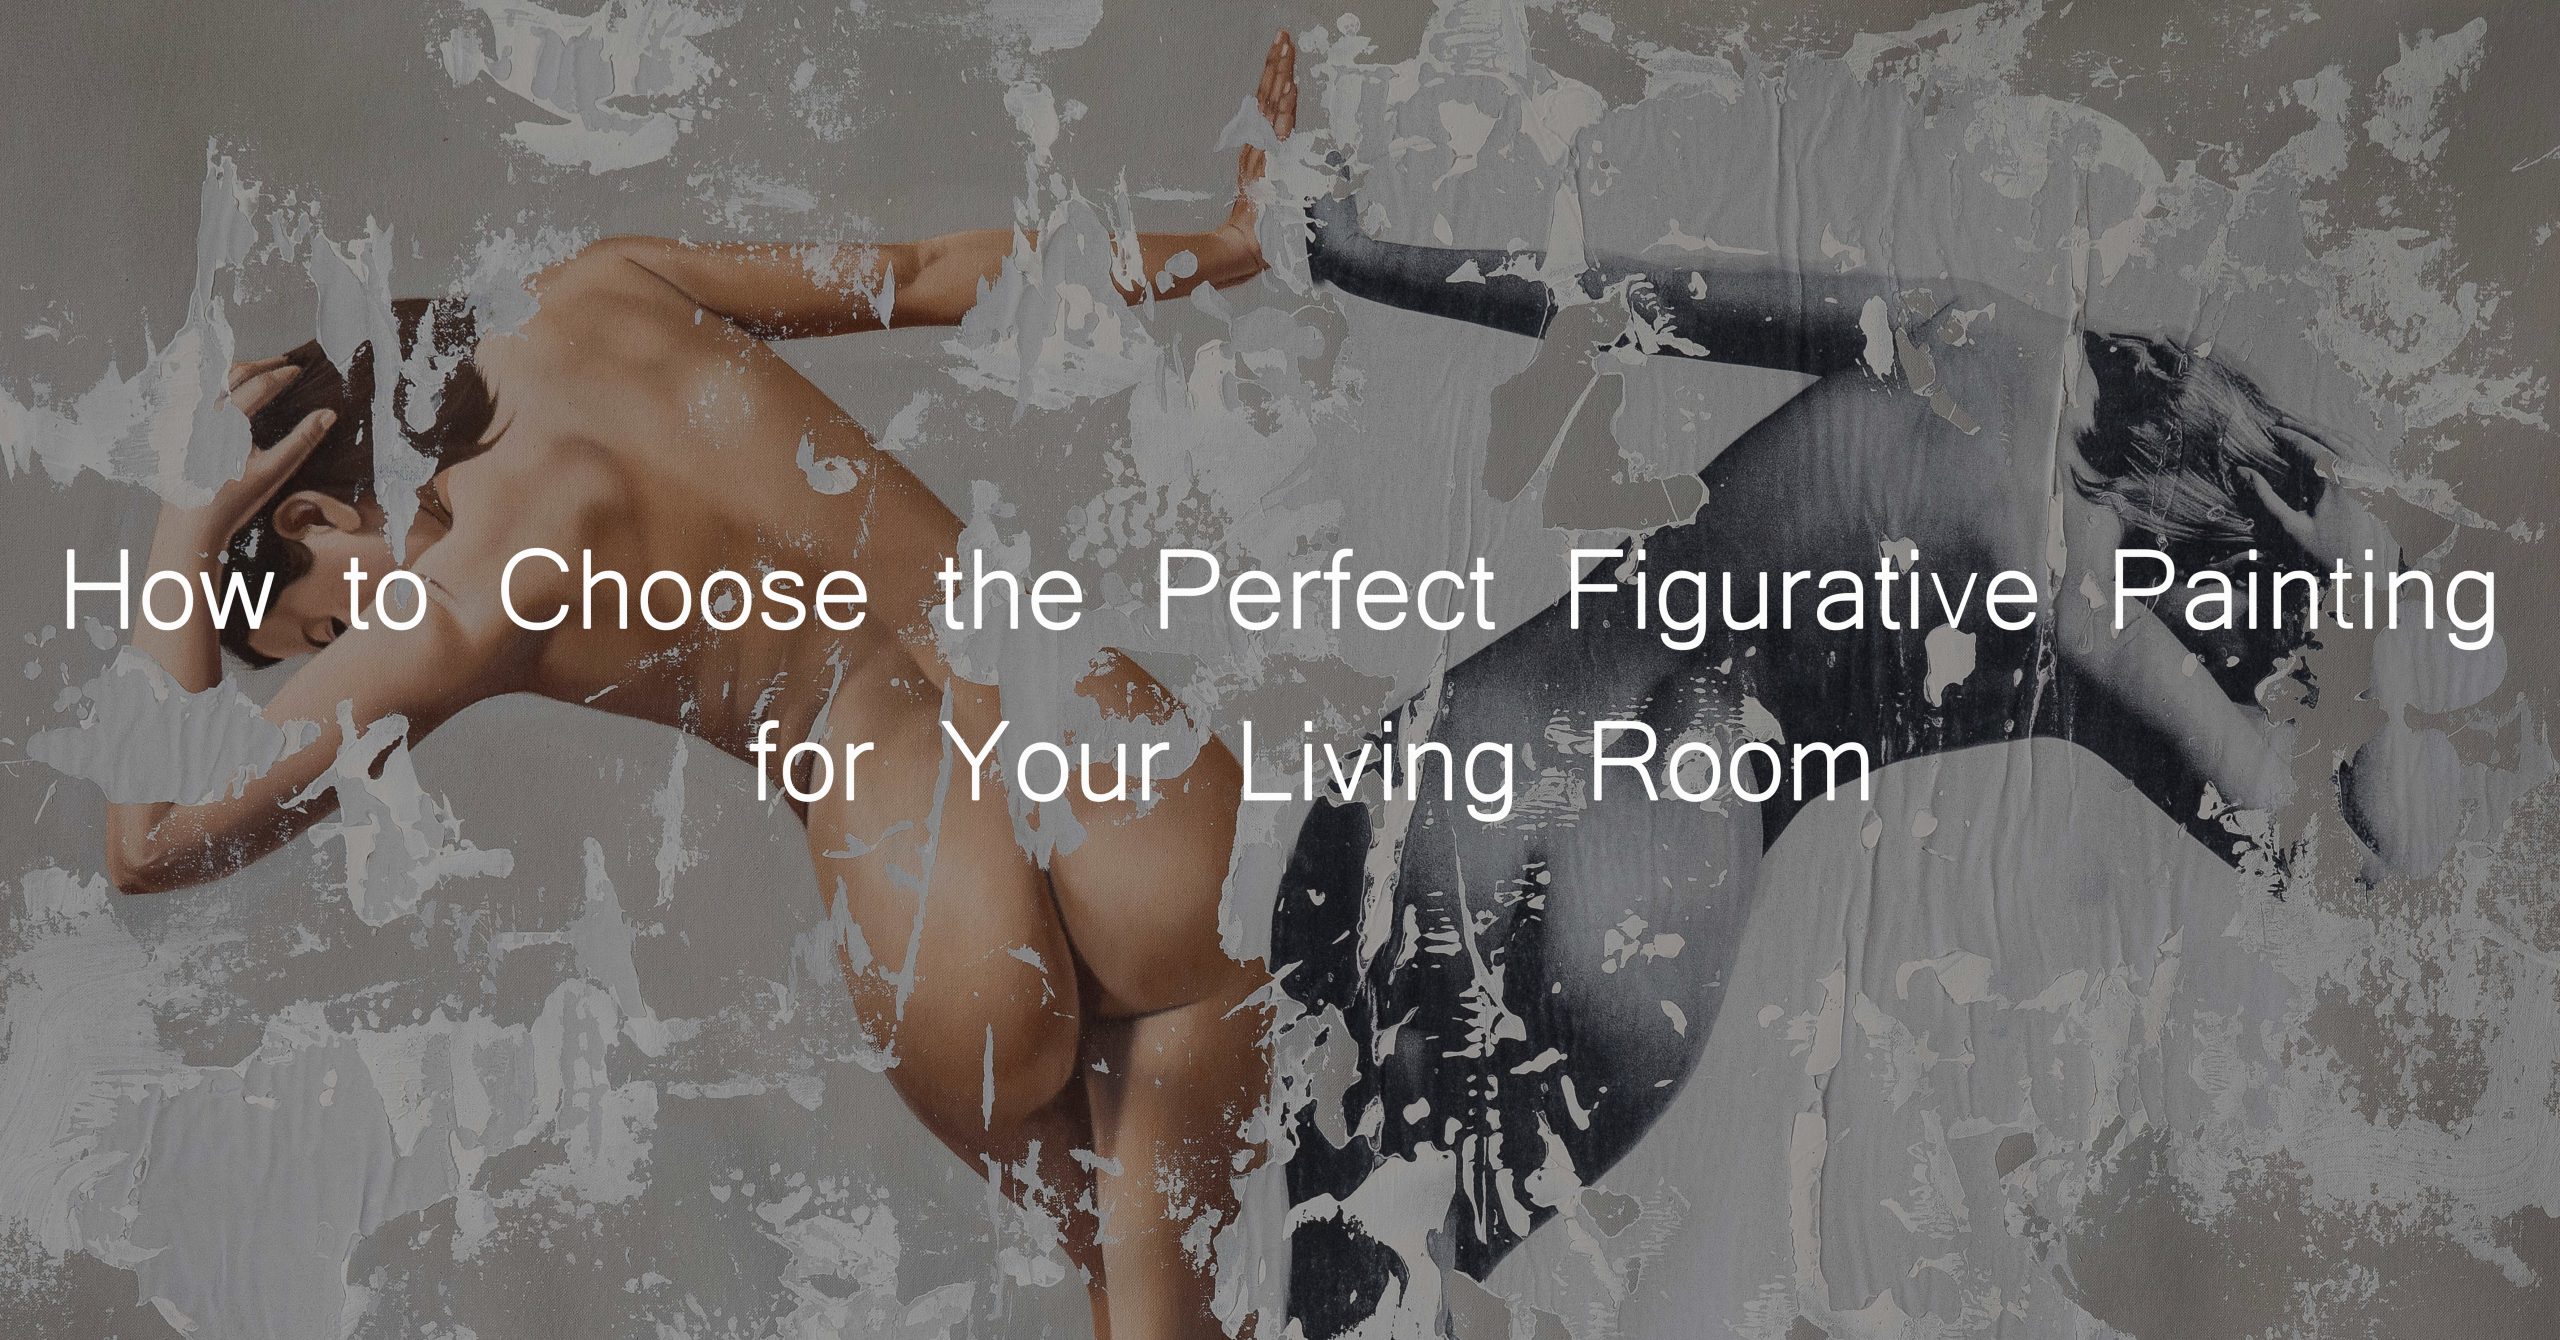 How to Choose the Perfect Figurative Painting for Your Living Room text